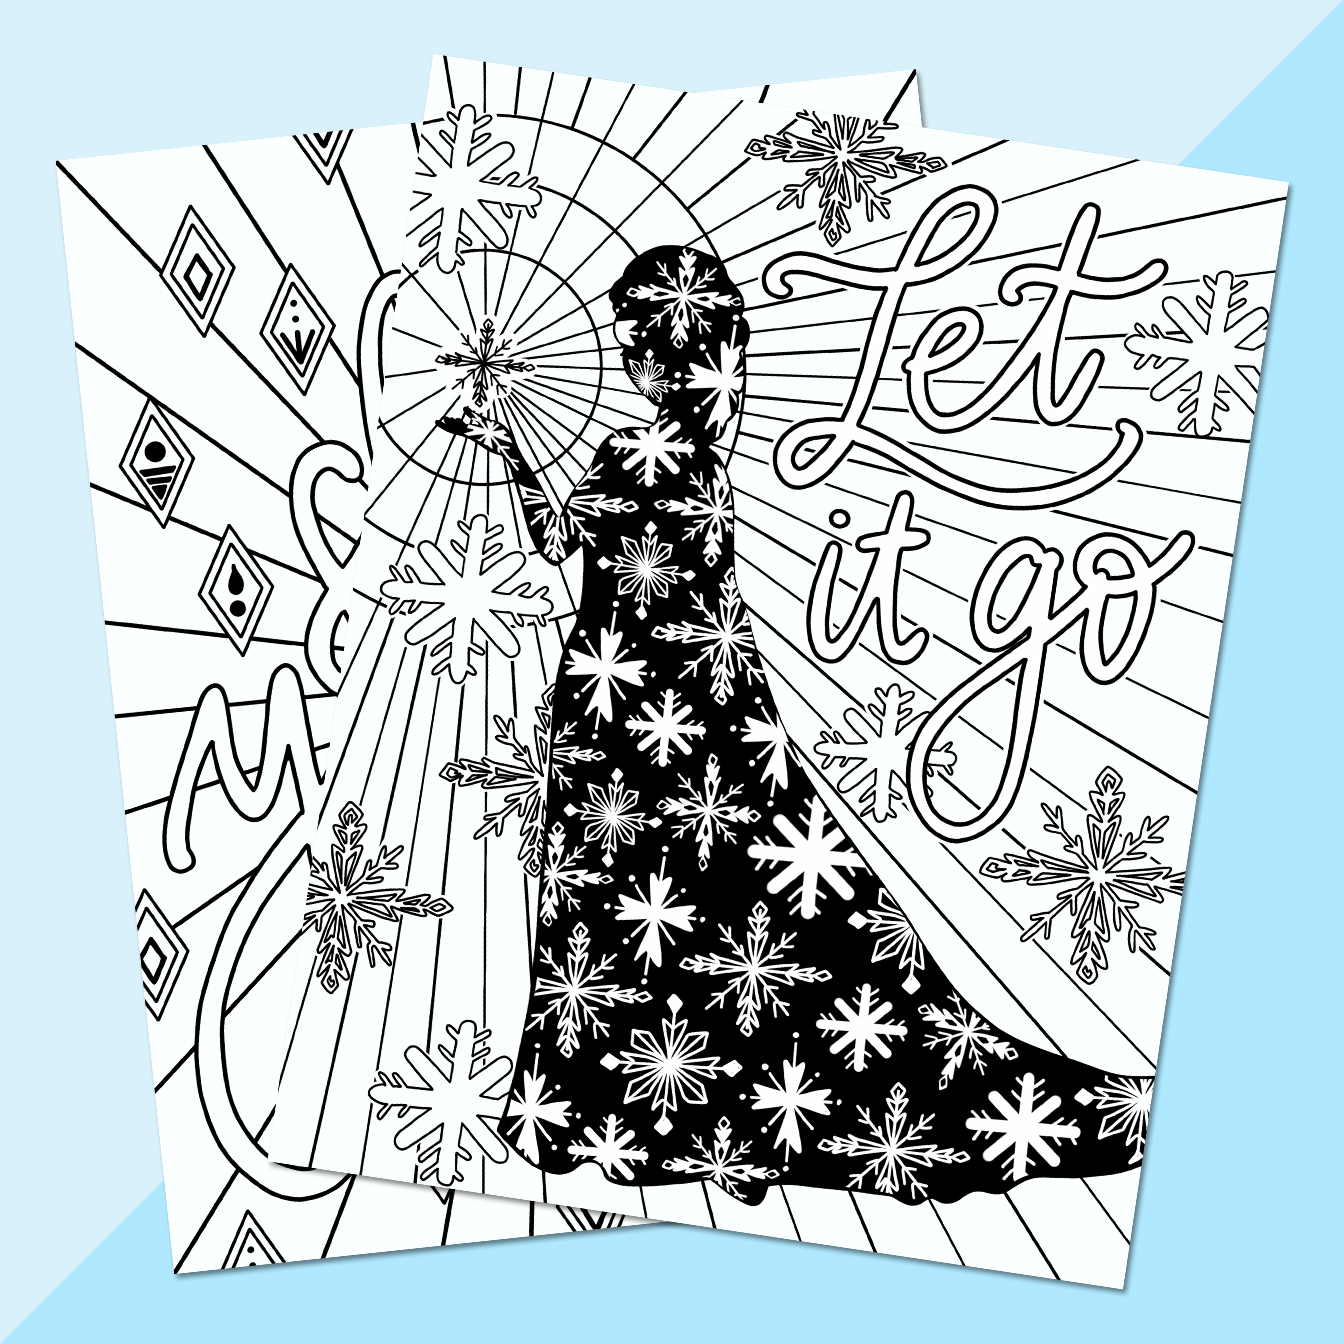 free printable elsa coloring pages with two examples on blue background